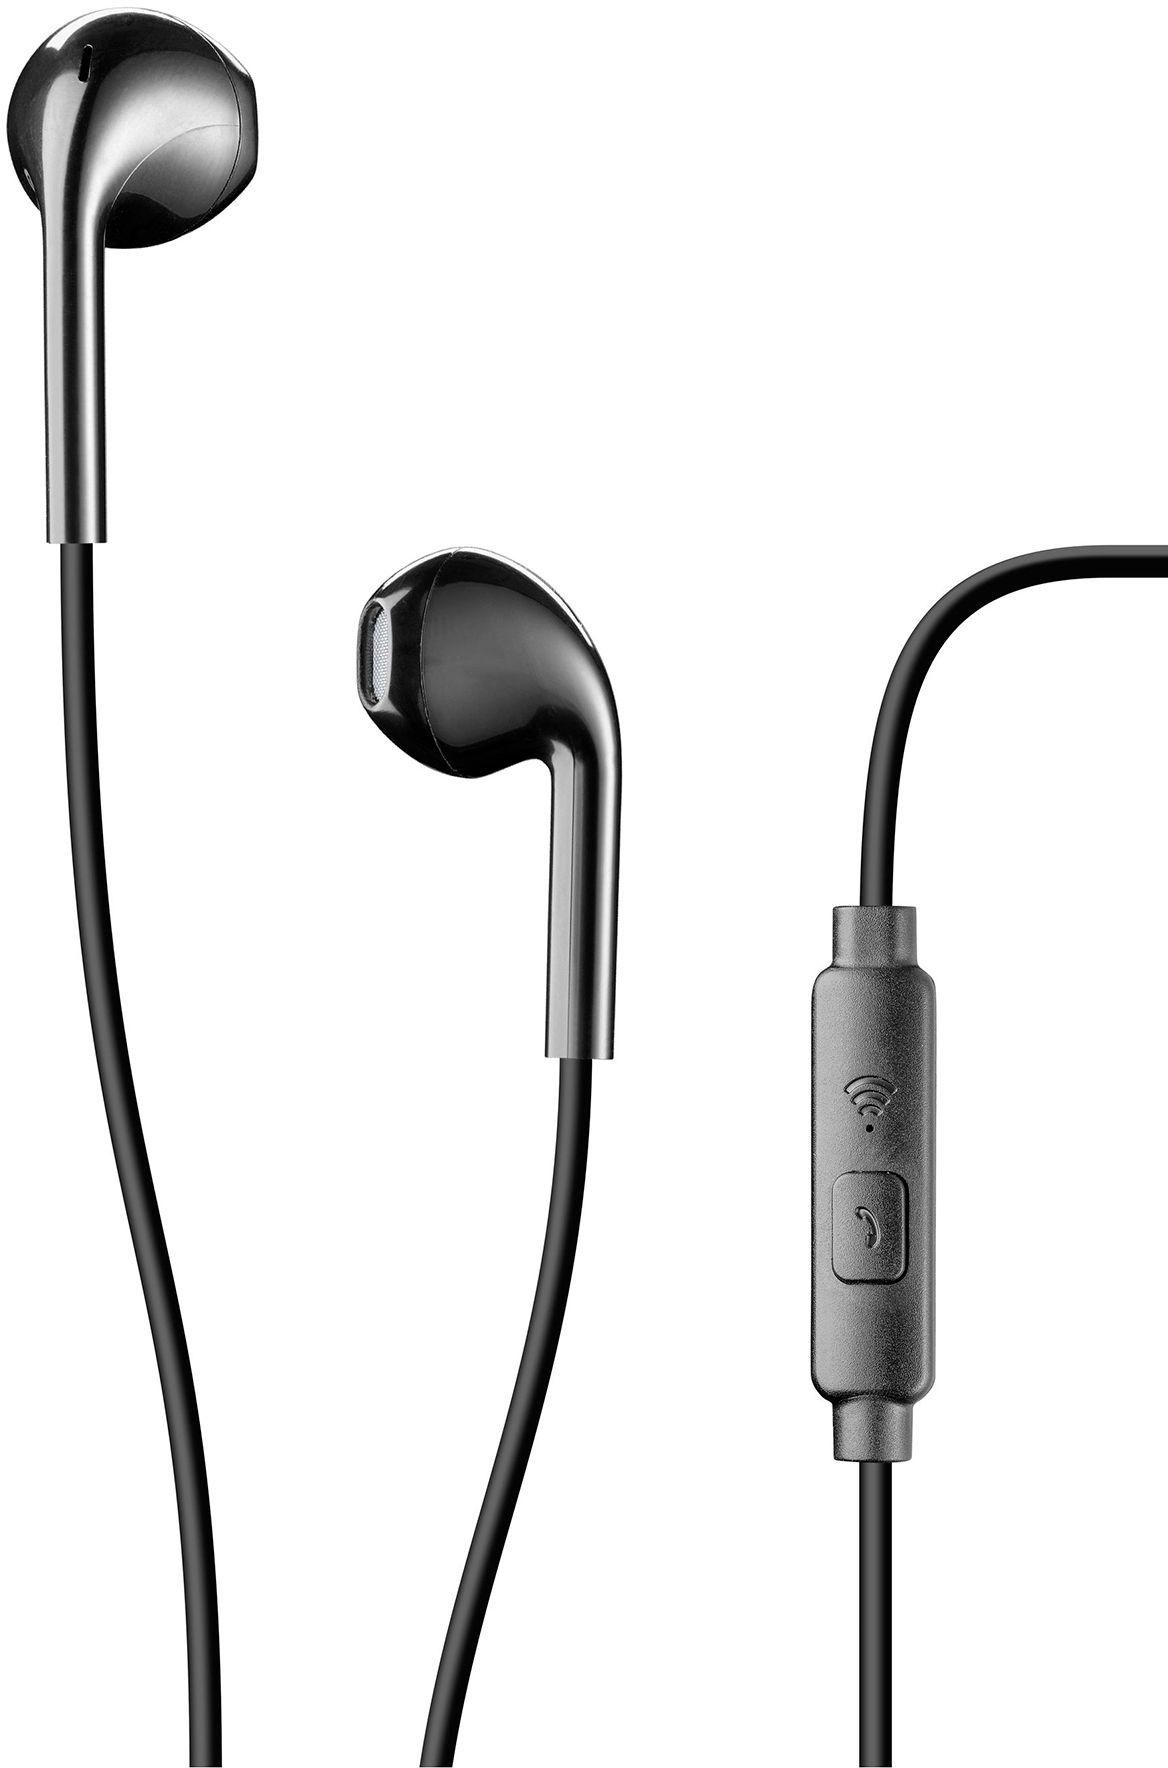 Cellularline In-Ear Wired Earphone with Microphone - Black